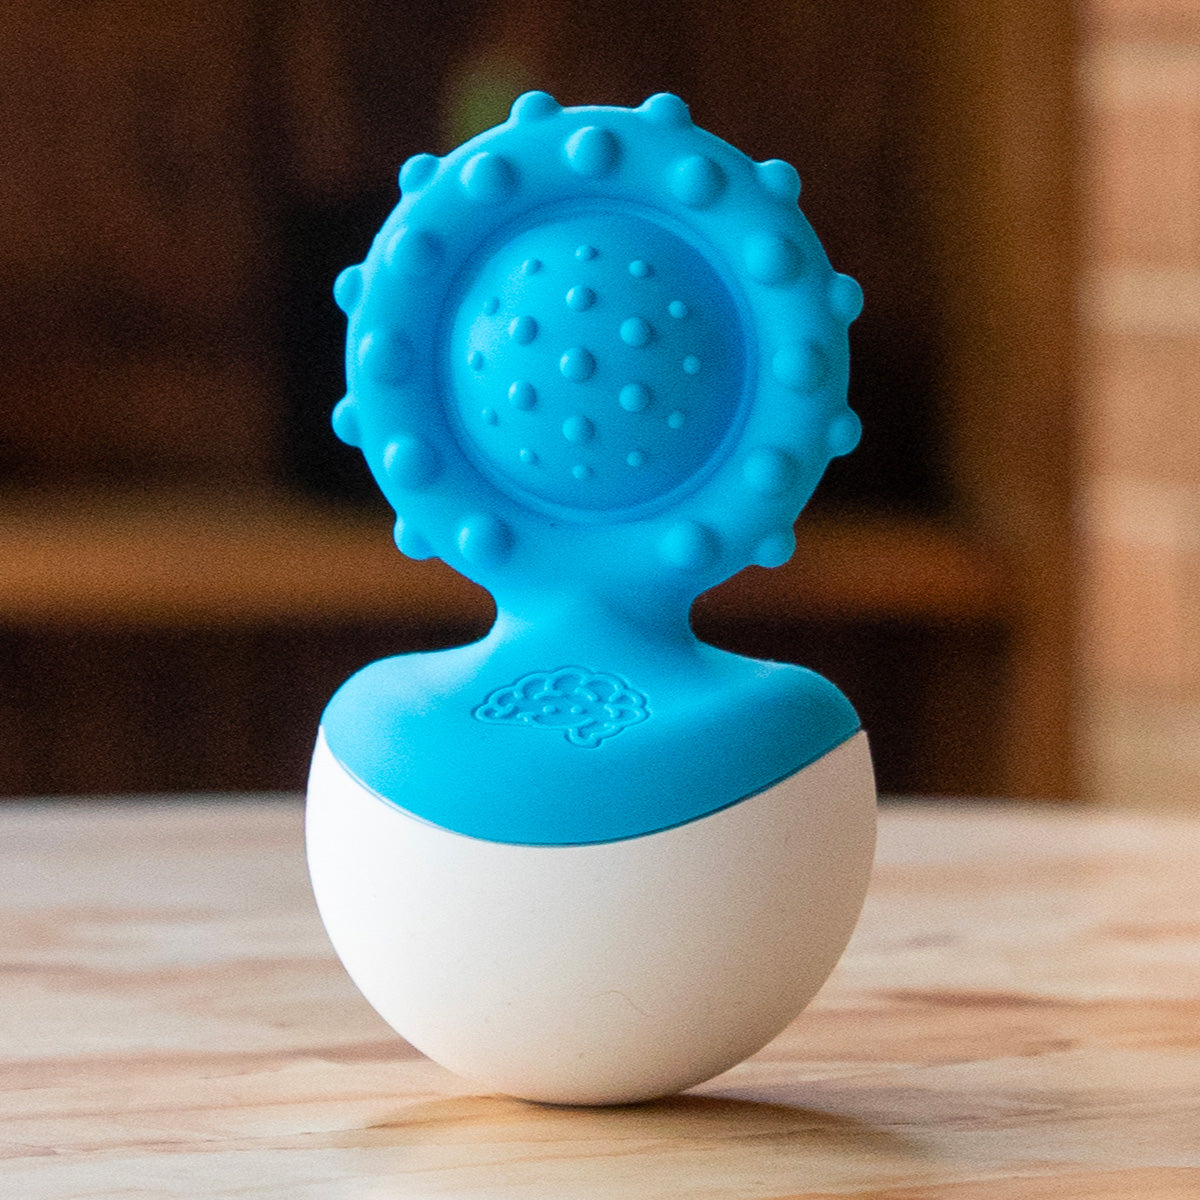 Dimpl Wobbl in Blue from Fat Brain Toys